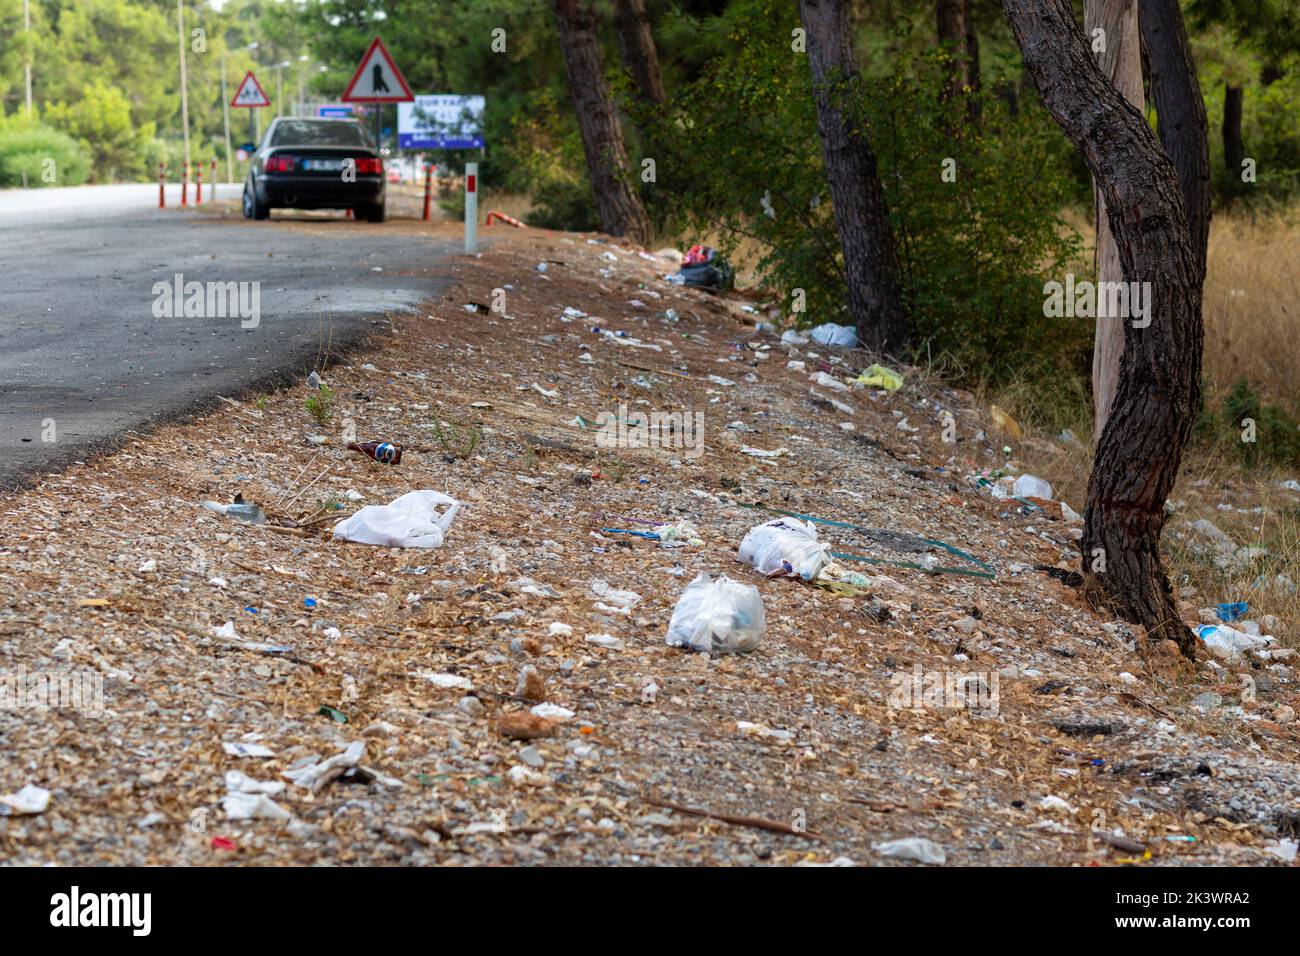 Garbage thrown on the side of the highway. Stock Photo